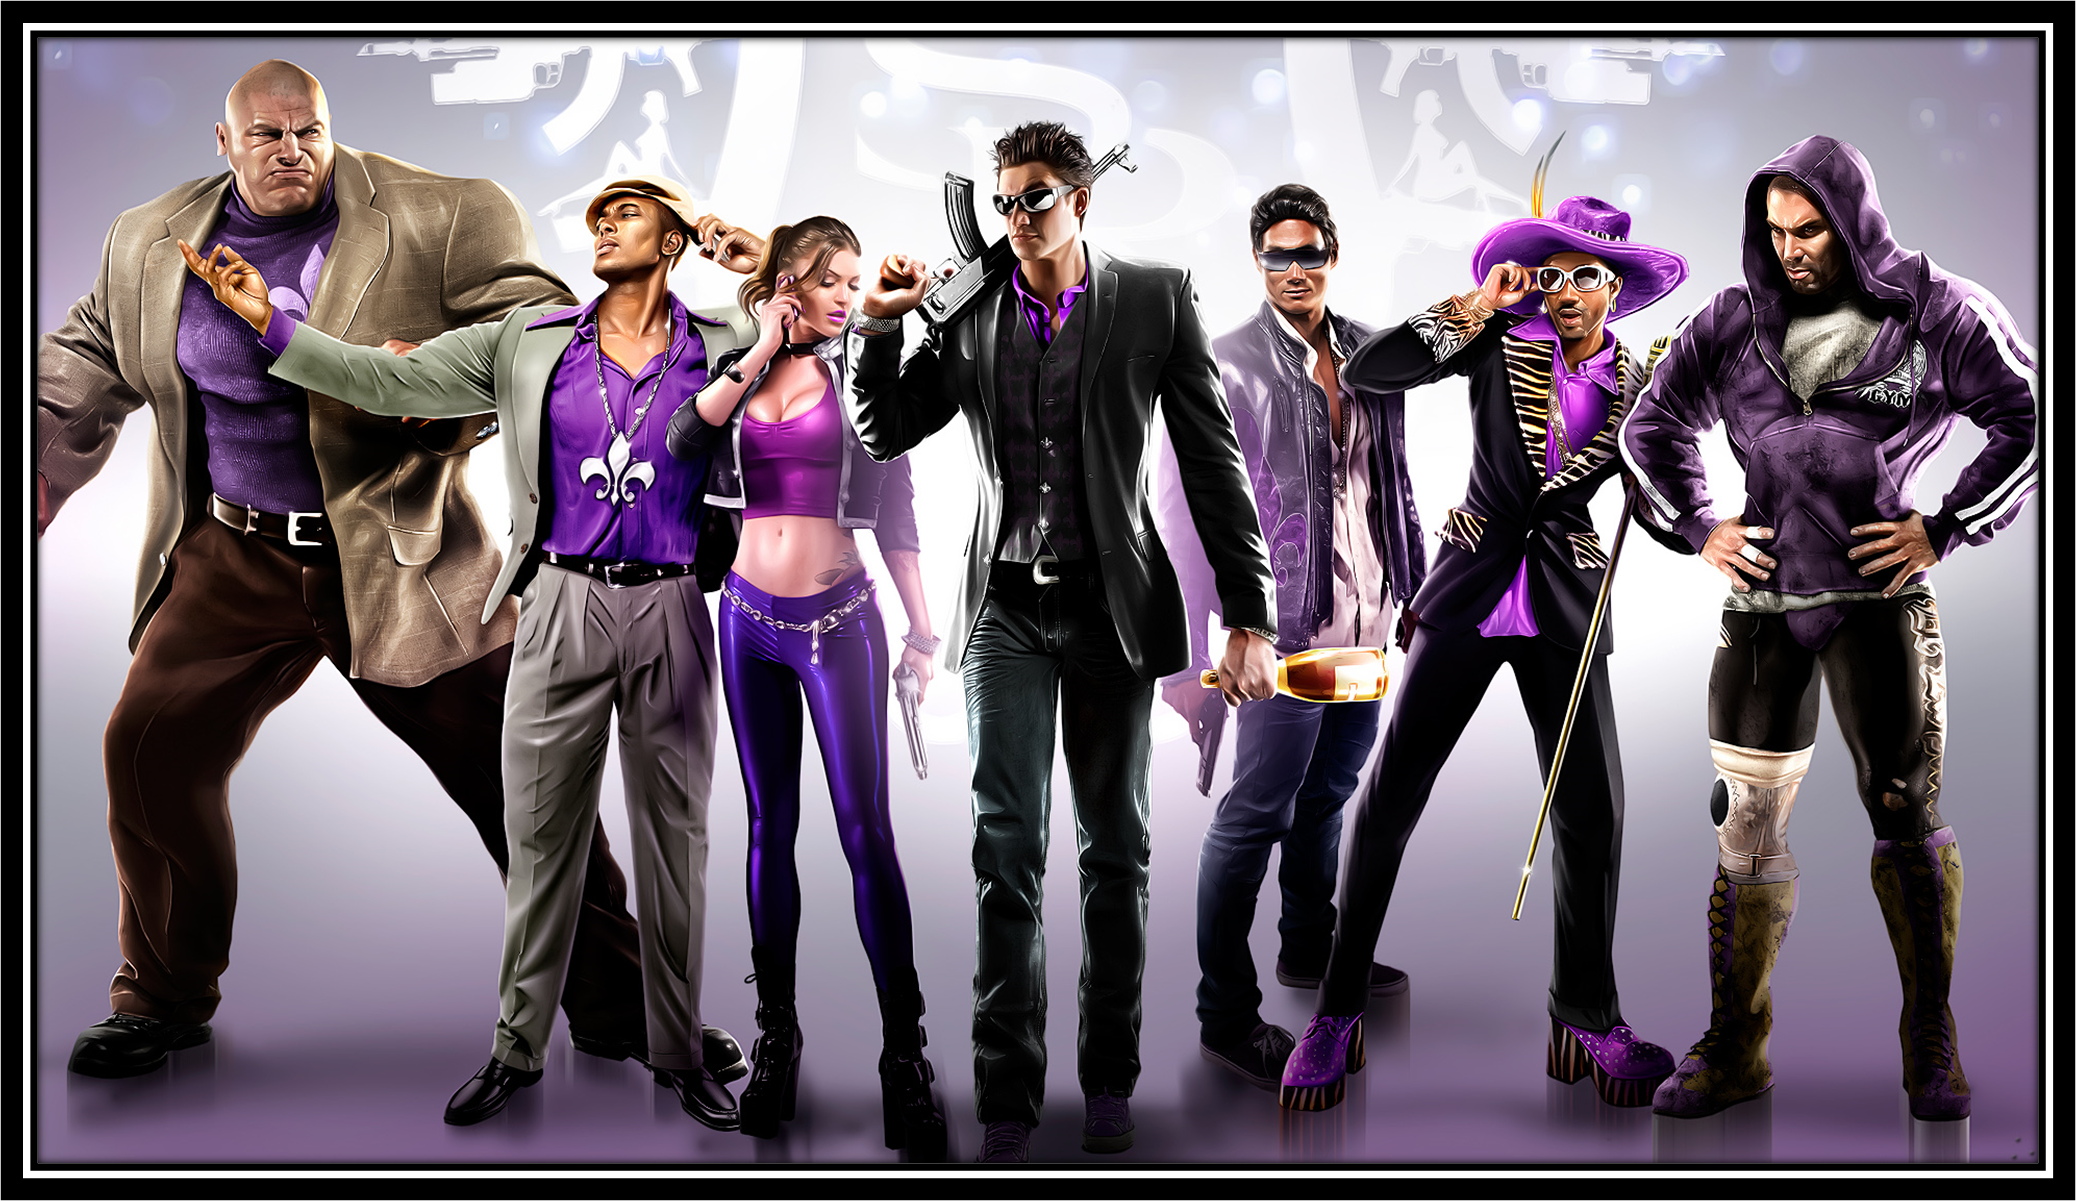 Video Games And Books Related To Saints Row